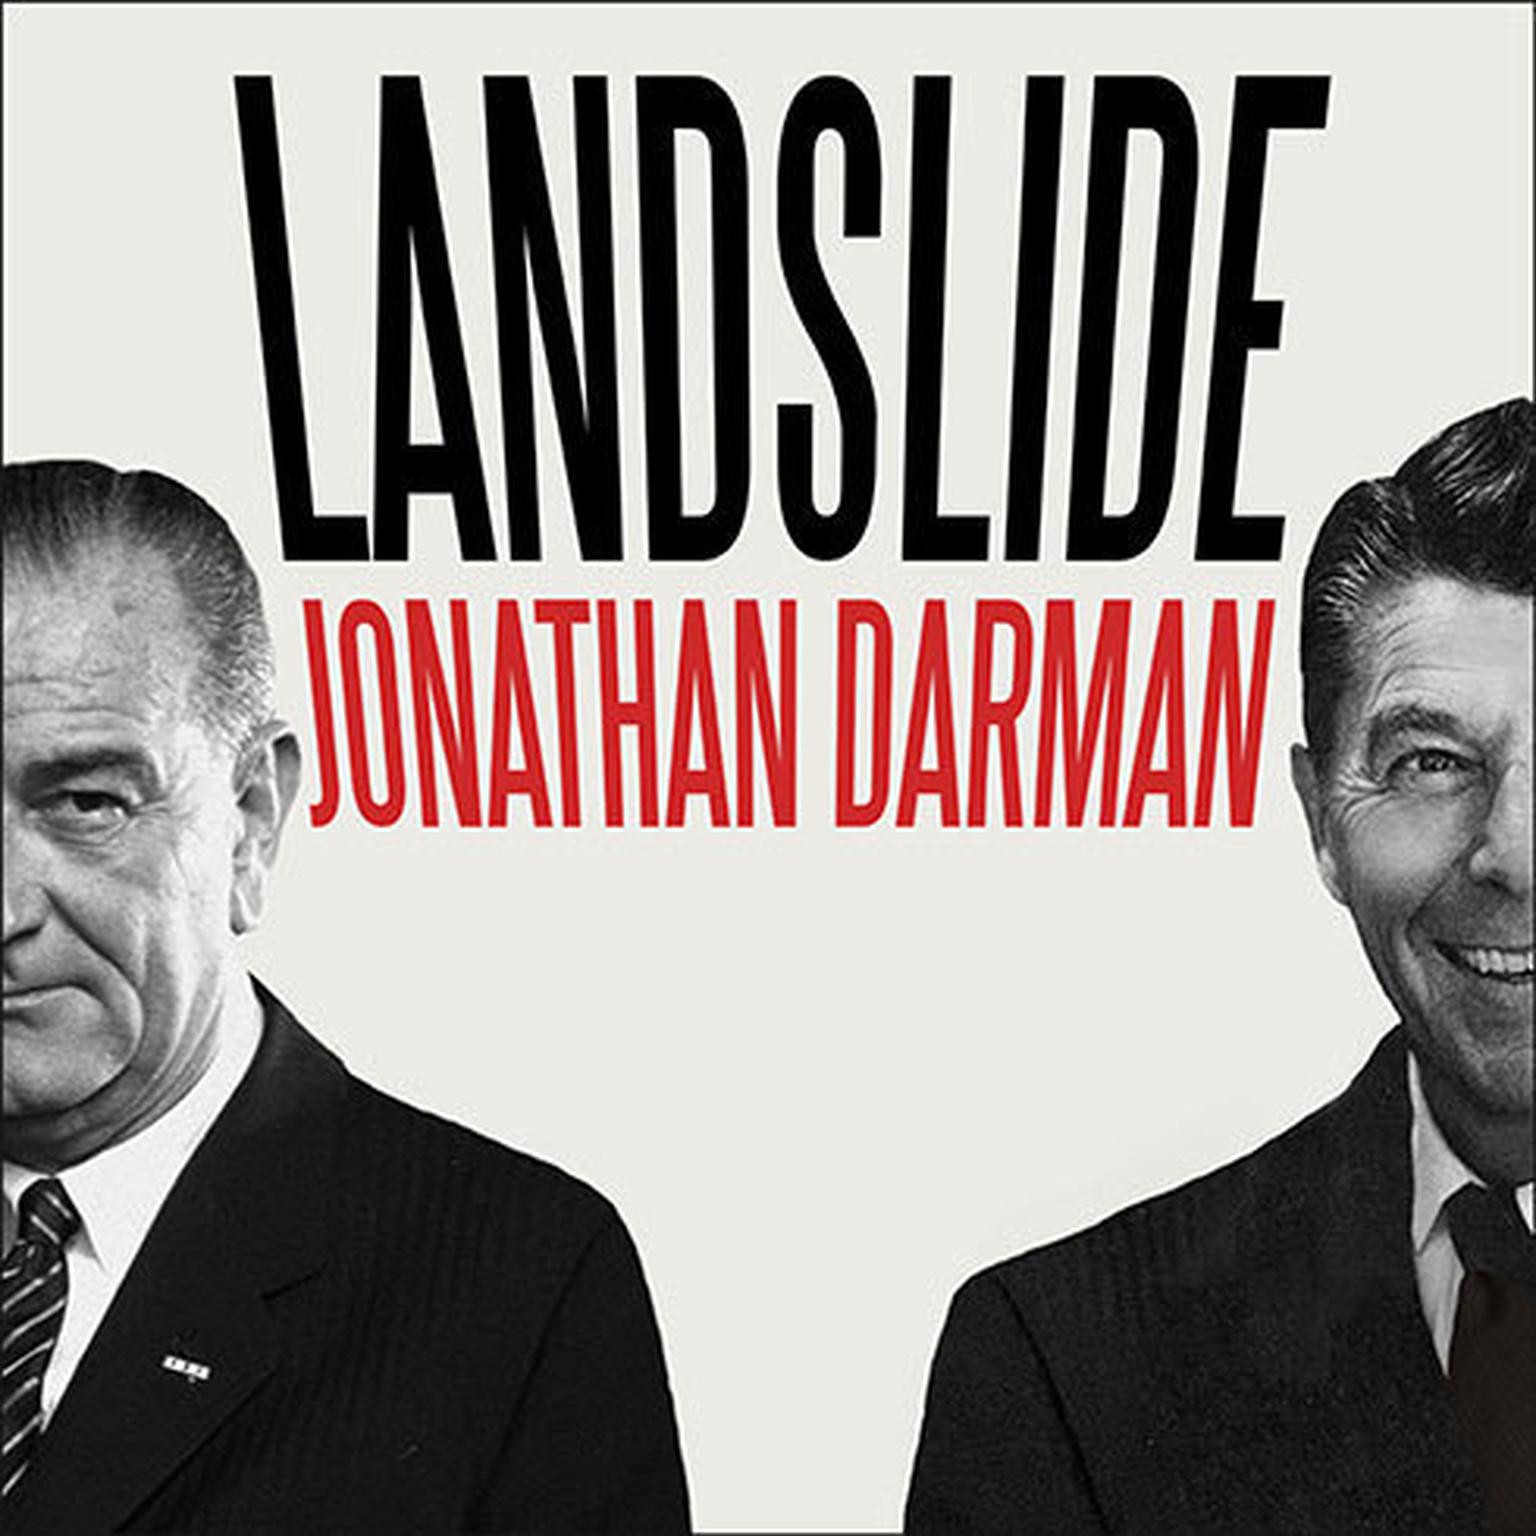 Landslide: LBJ and Ronald Reagan at the Dawn of a New America Audiobook, by Jonathan Darman